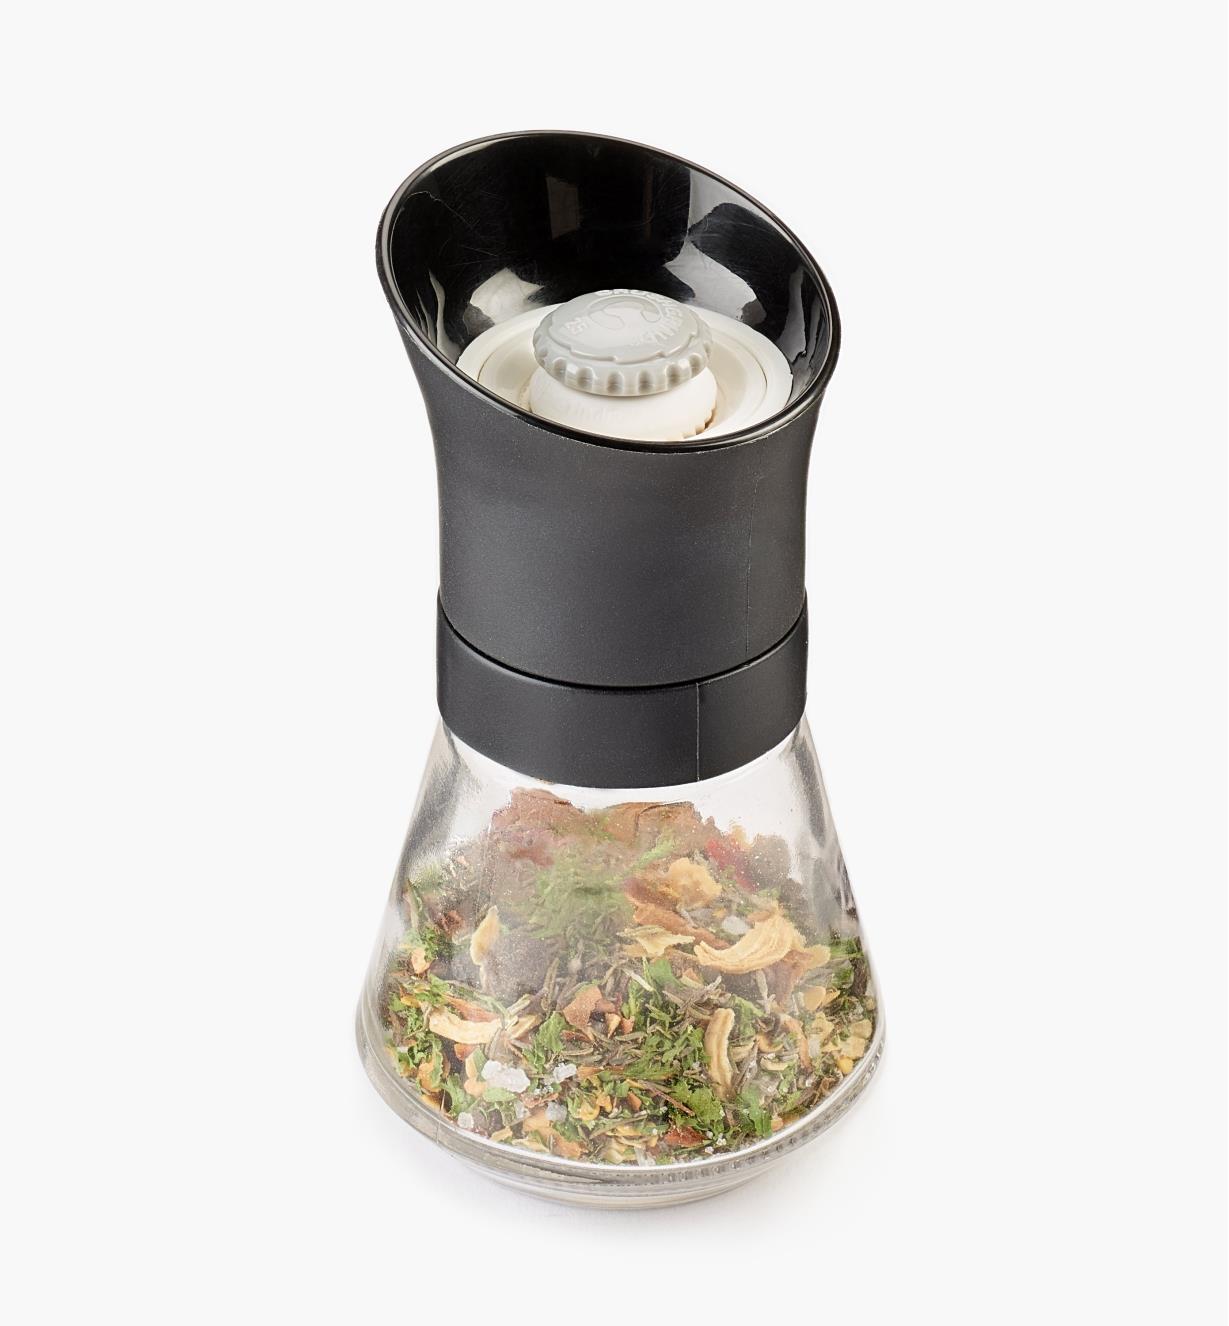 CrushGrind mill filled with a herb and spice blend